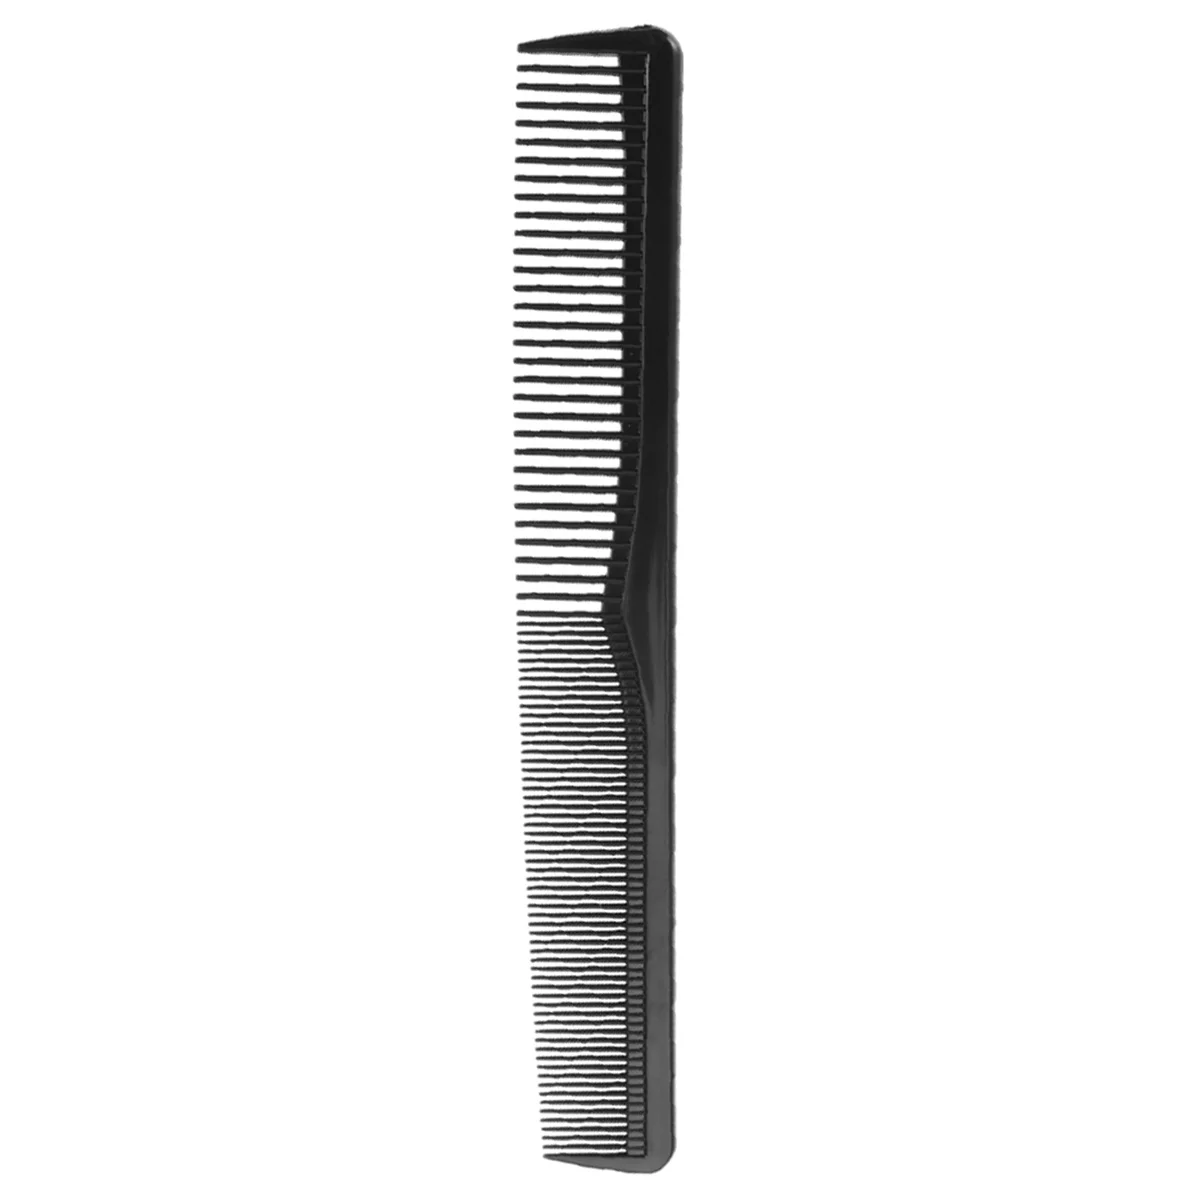 Practical Compact Plastic Anti-Static Tooth Design Hairdressing Double Side Pettine Hair Combs Hairbrush For Salon Home laboao laboratory orbital shaker compact design for centrifuge tubes